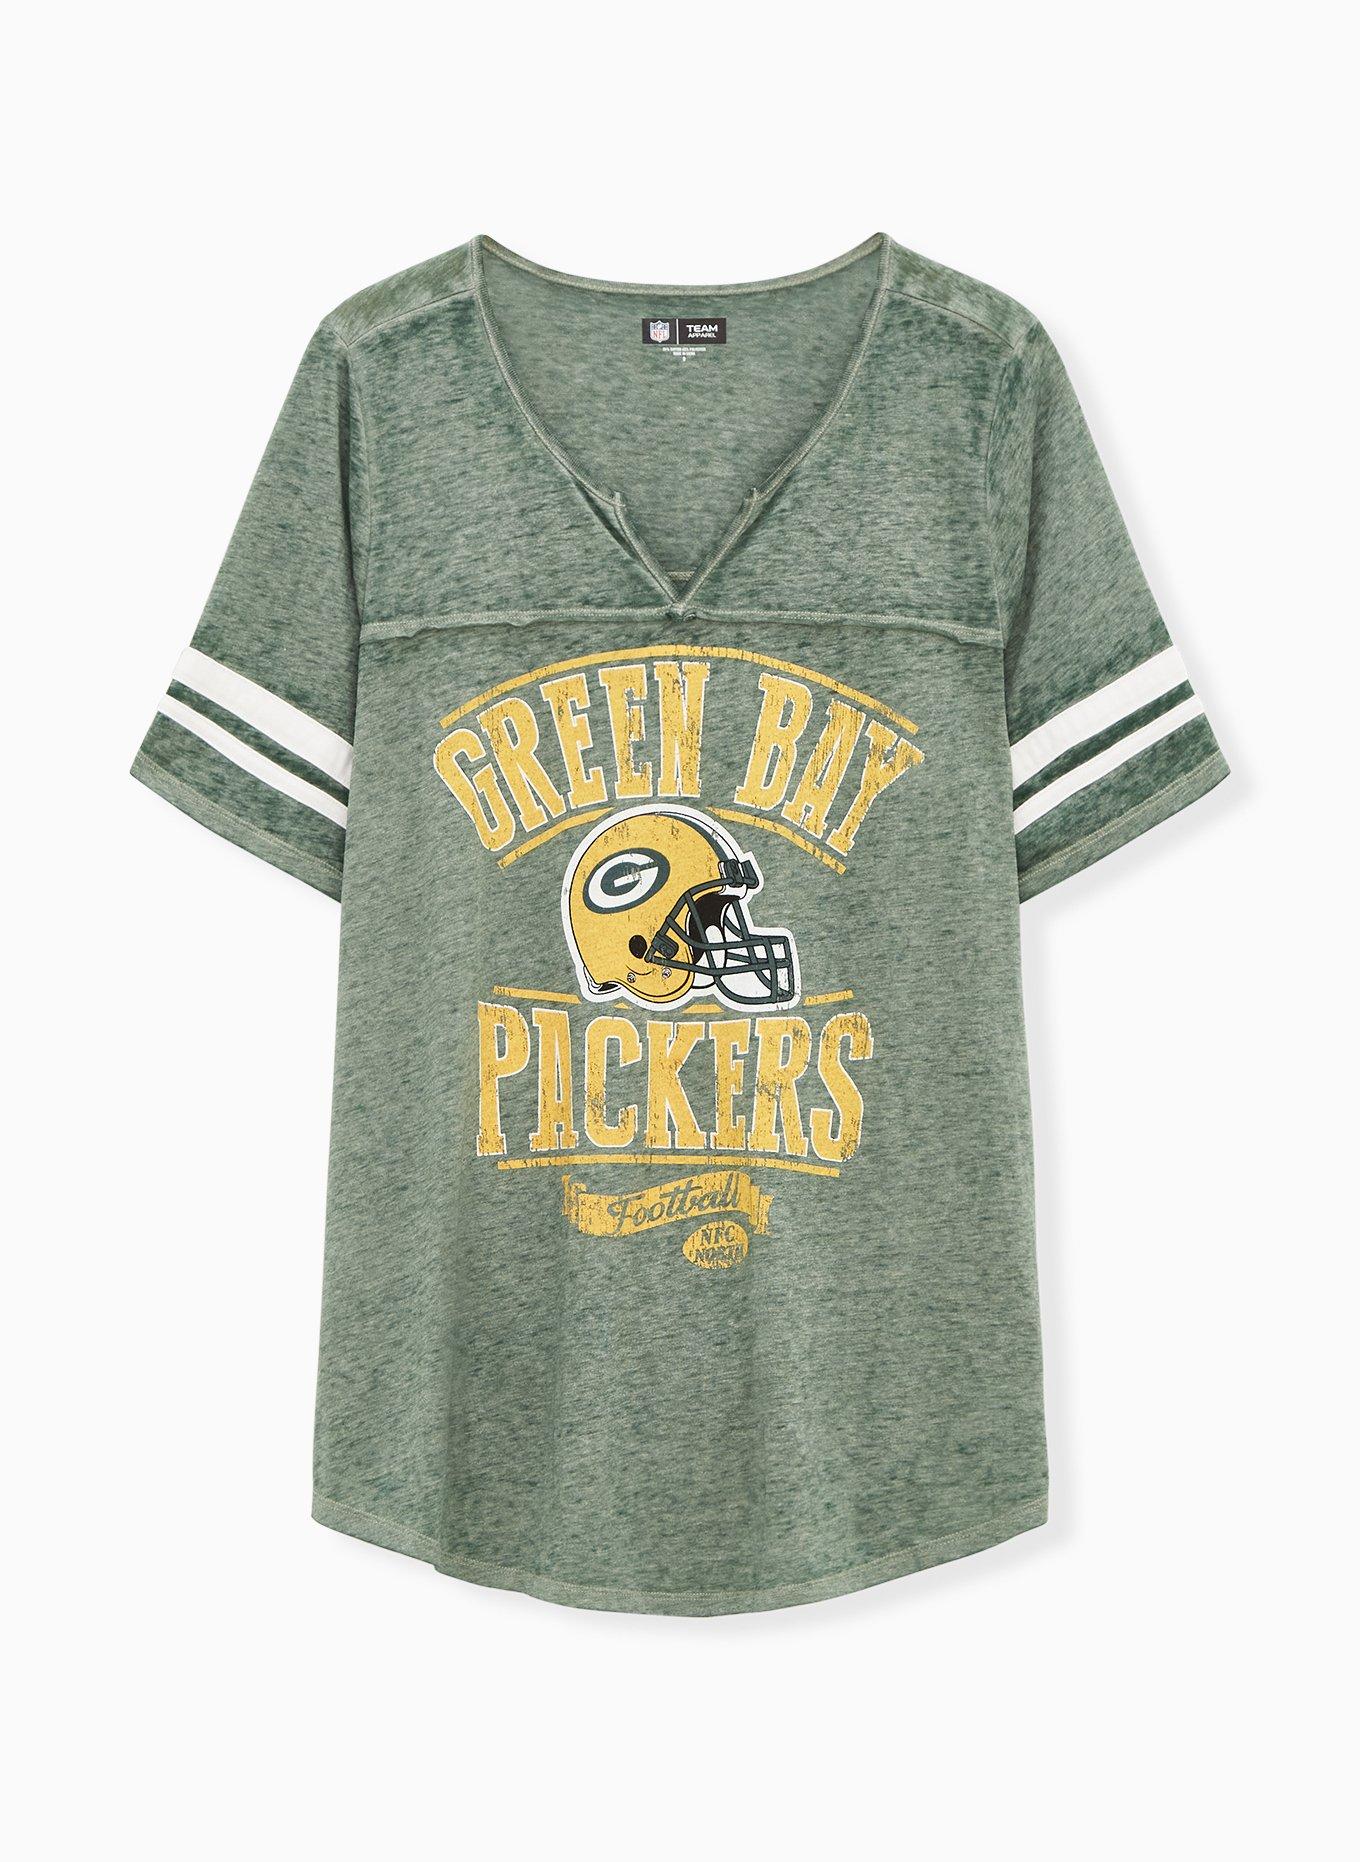 NWT Torrid Plus Size 0 Large CLASSIC FIT FOOTBALL TEE - GREEN BAY PACKERS  GREEN